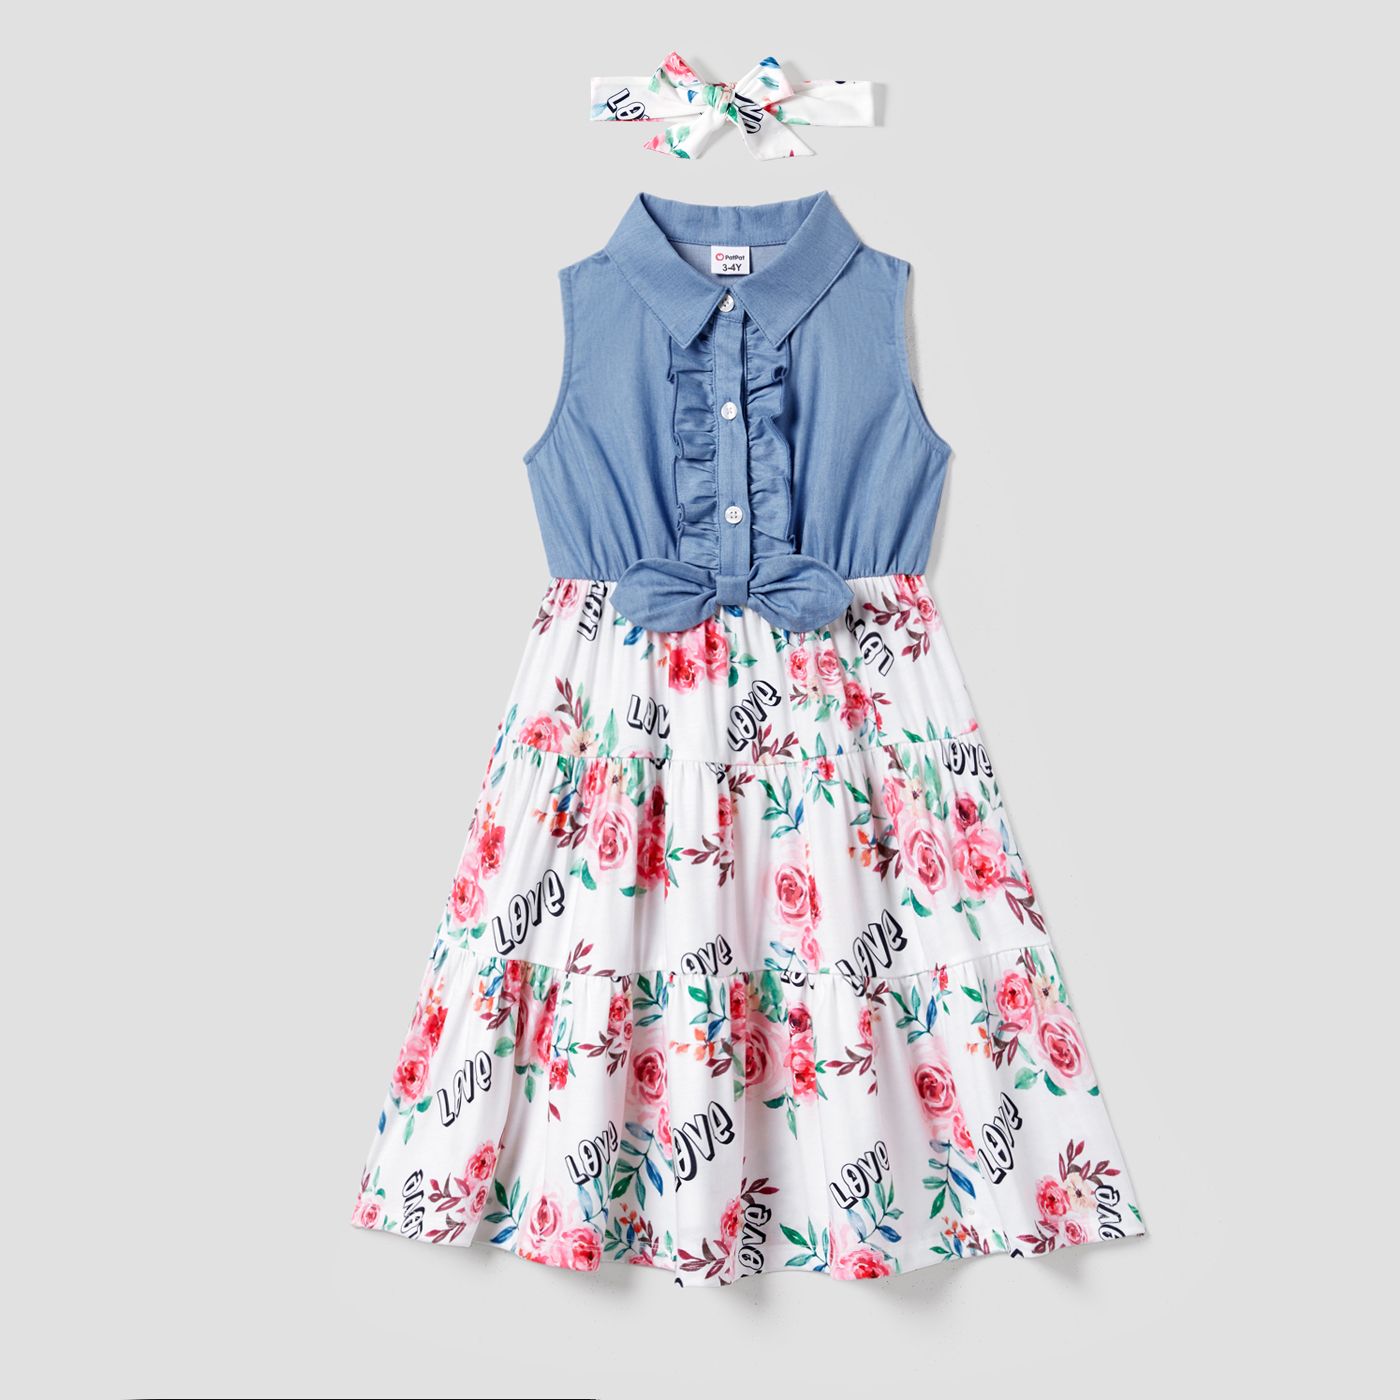 Family Matching Letter And Floral Print Splicing Denim Blue Bow Belted Sleeveless Dresses With Headband And Collared T-shirts Set